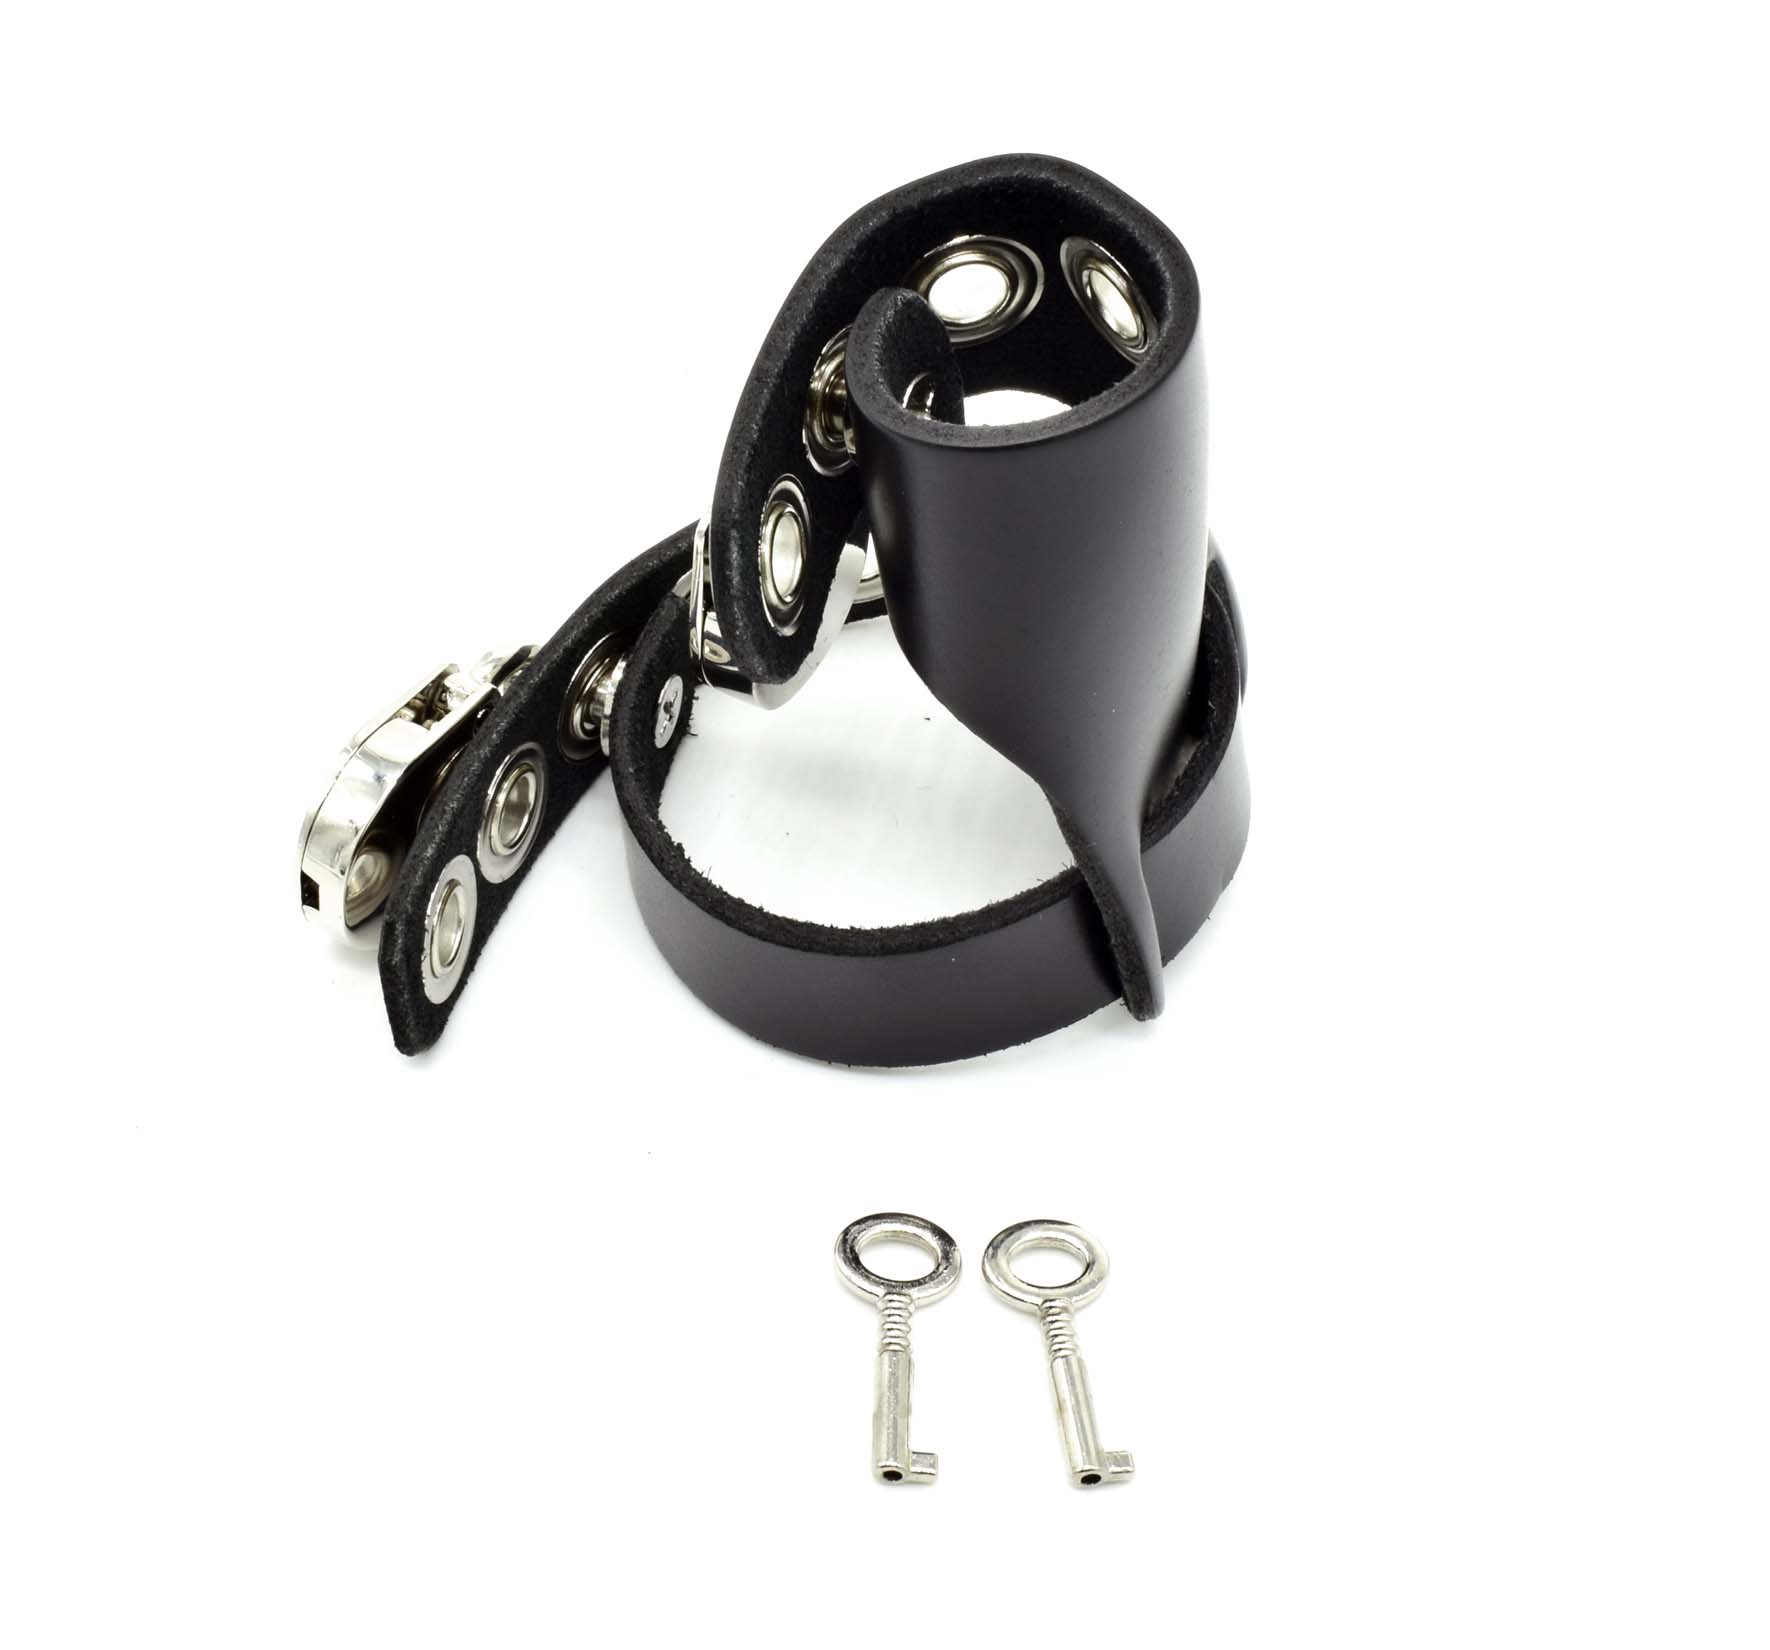 The Cock Lock Latigo Chastity Cage in the closed position with two locks and a set of two keys standing on its end, topside view.